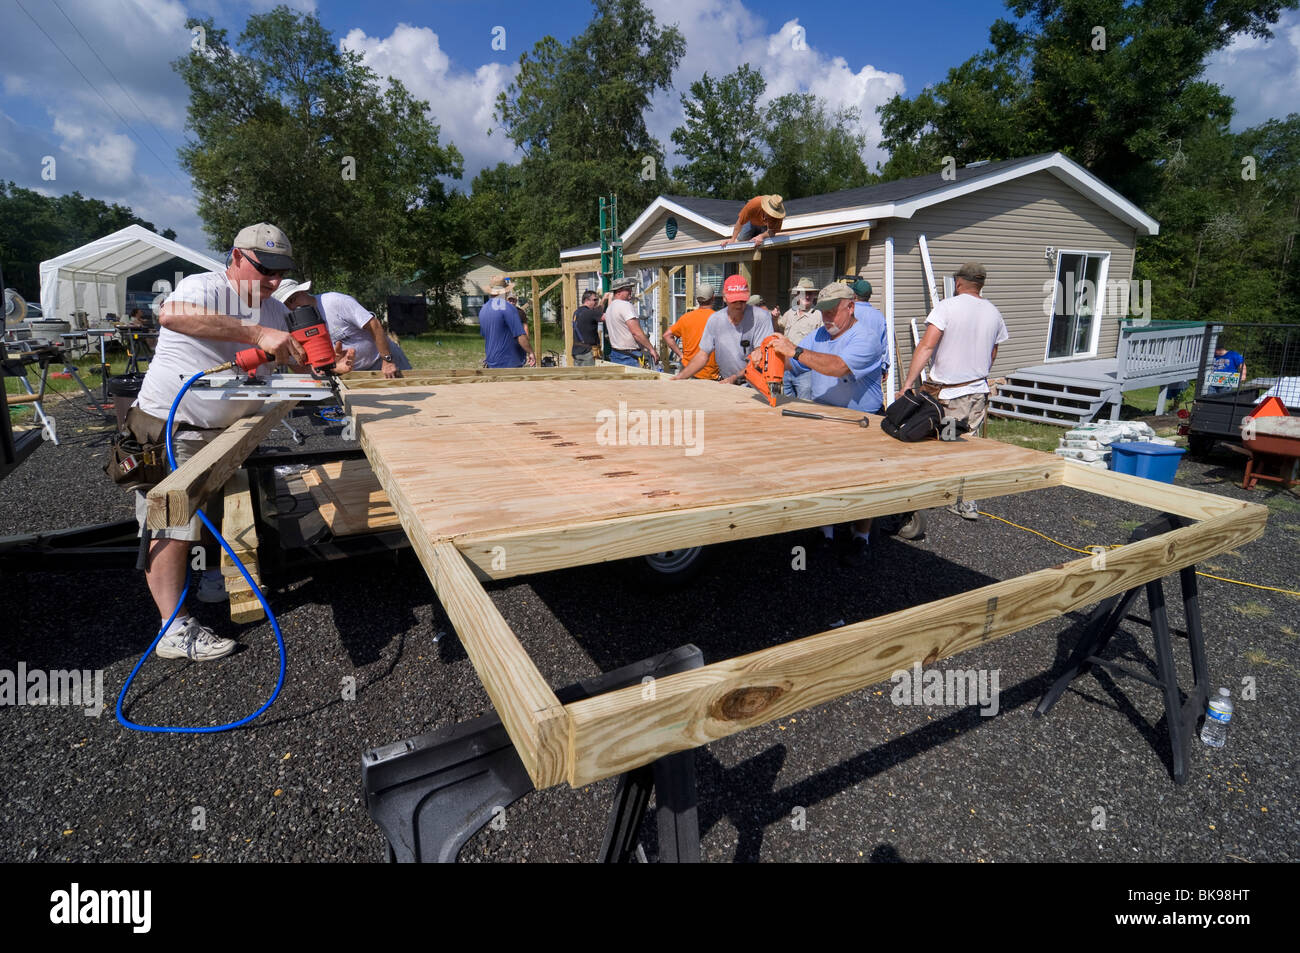 100 Club from First Baptist Church of High Springs works on mission outreach project in Ft. White. Stock Photo